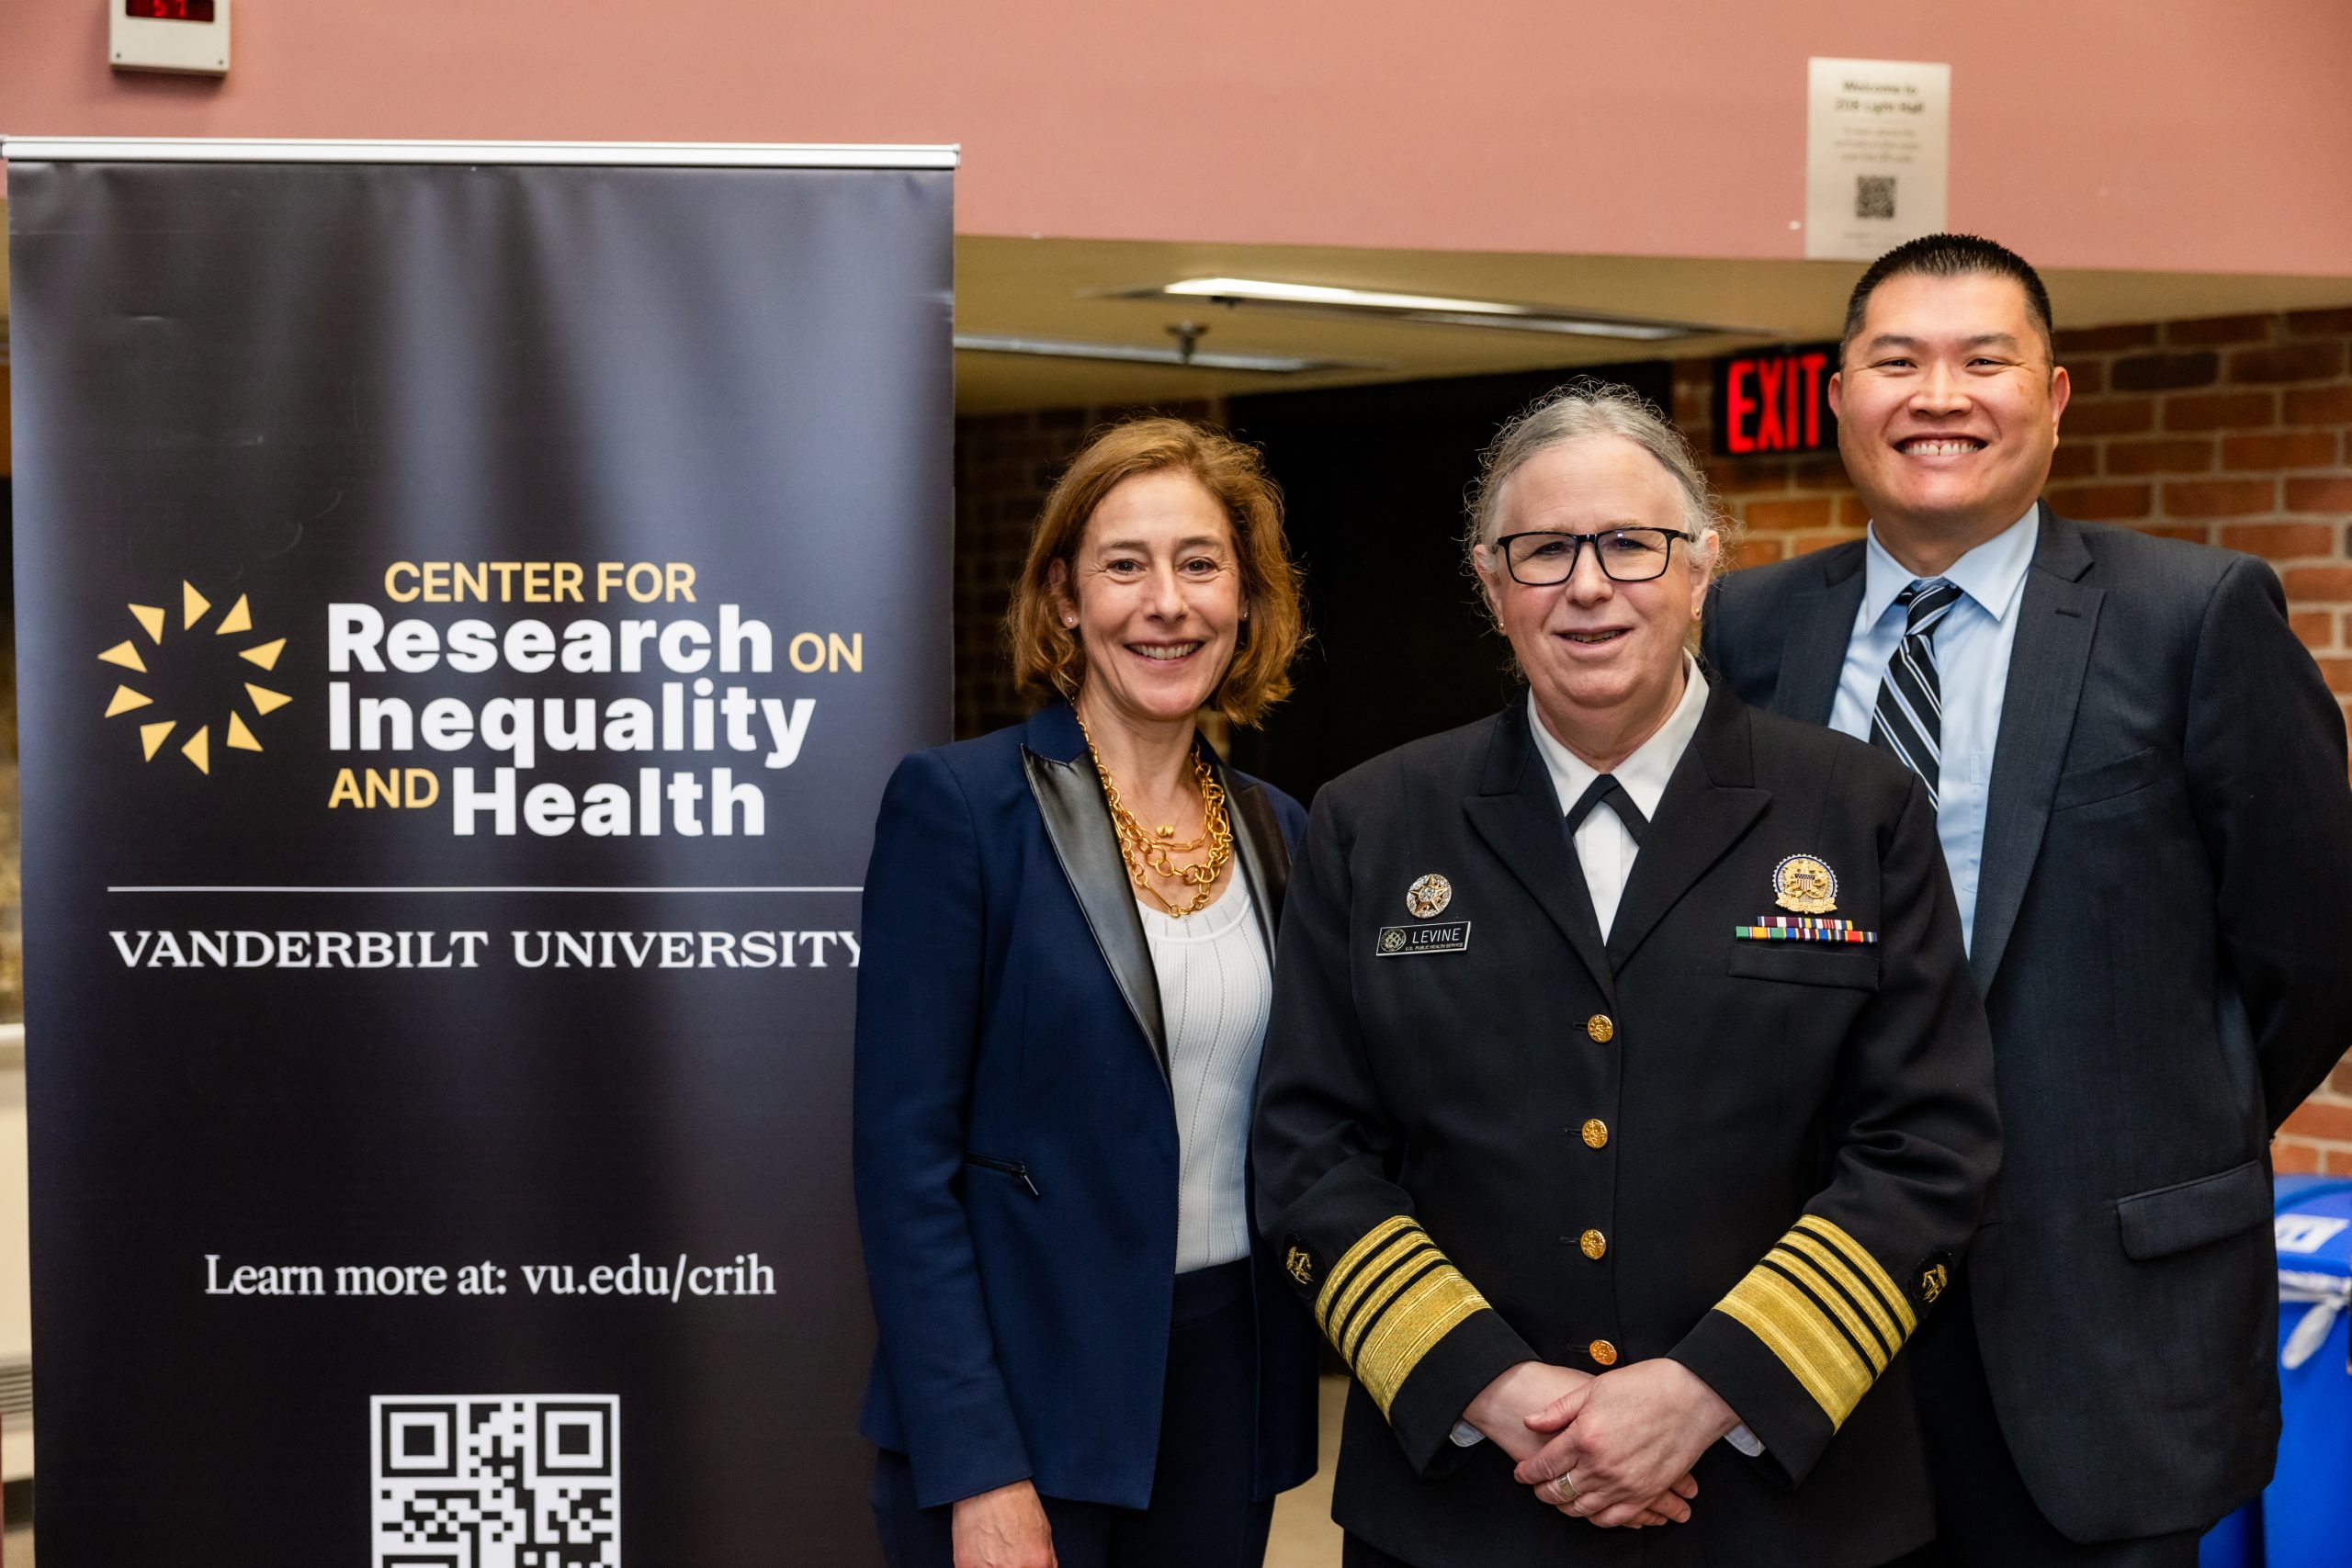 U.S. Cabinet official leads seminar on transgender health and policy